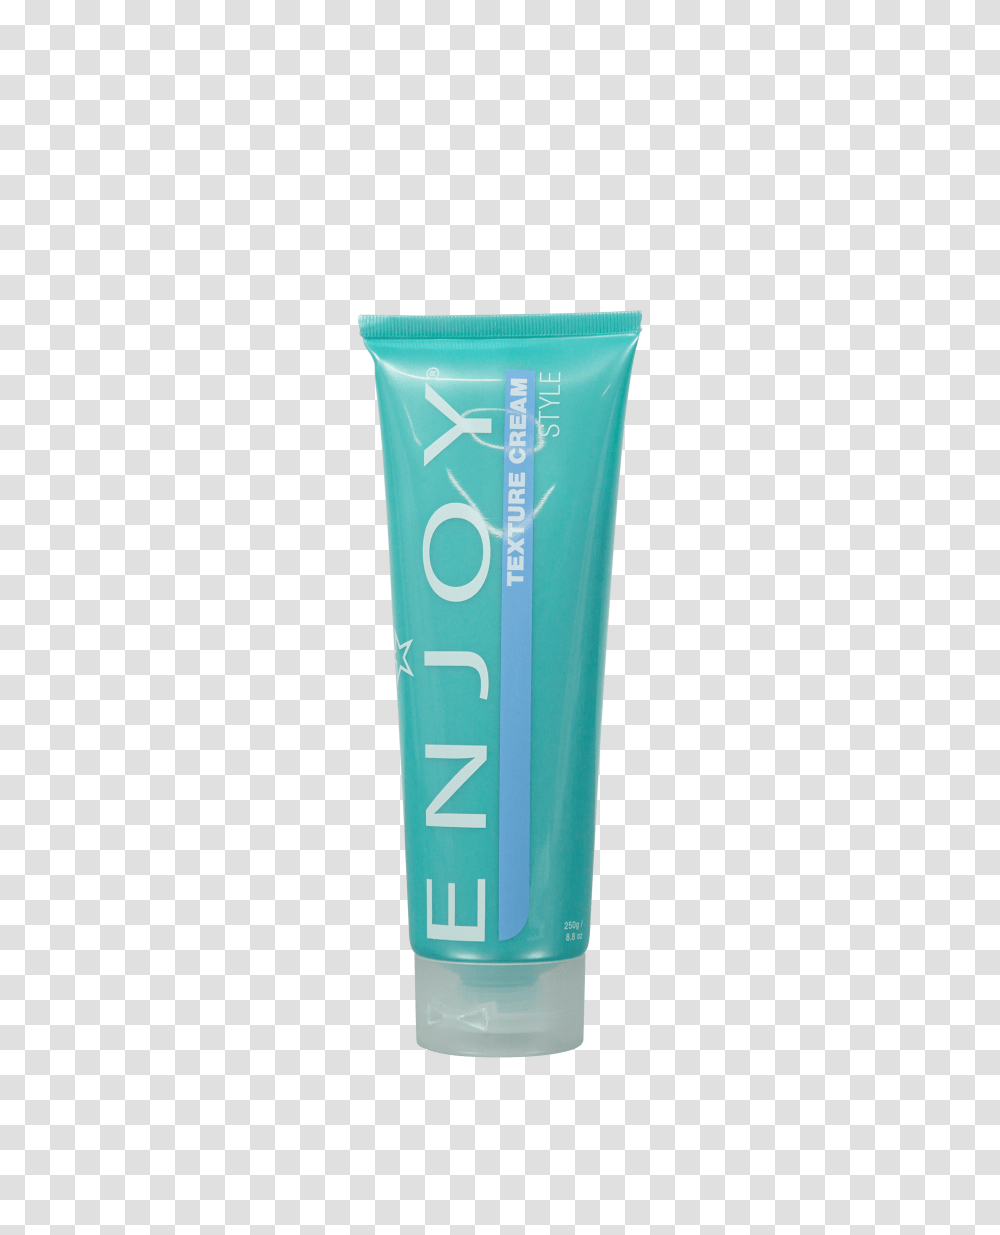 Texture Cream, Bottle, Cosmetics, Toothpaste, Sunscreen Transparent Png